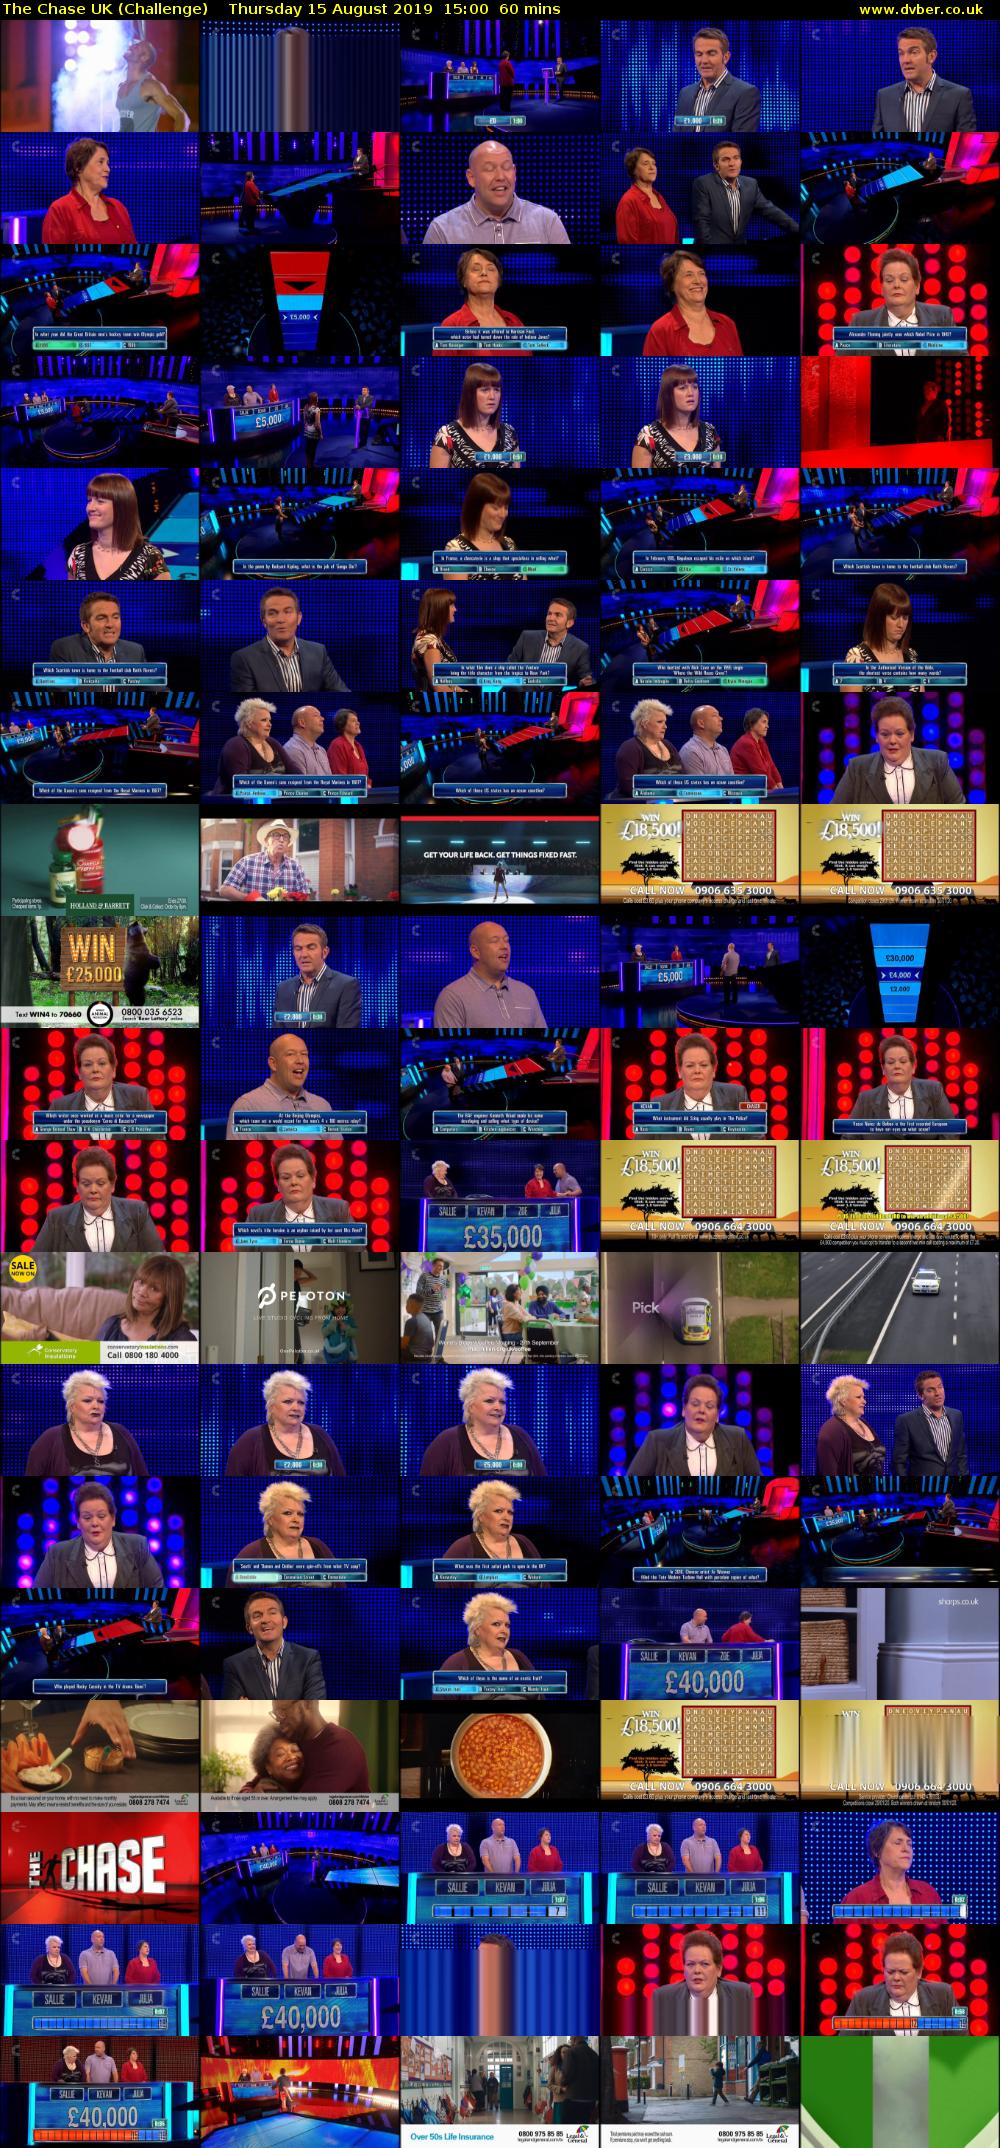 The Chase UK (Challenge) Thursday 15 August 2019 15:00 - 16:00